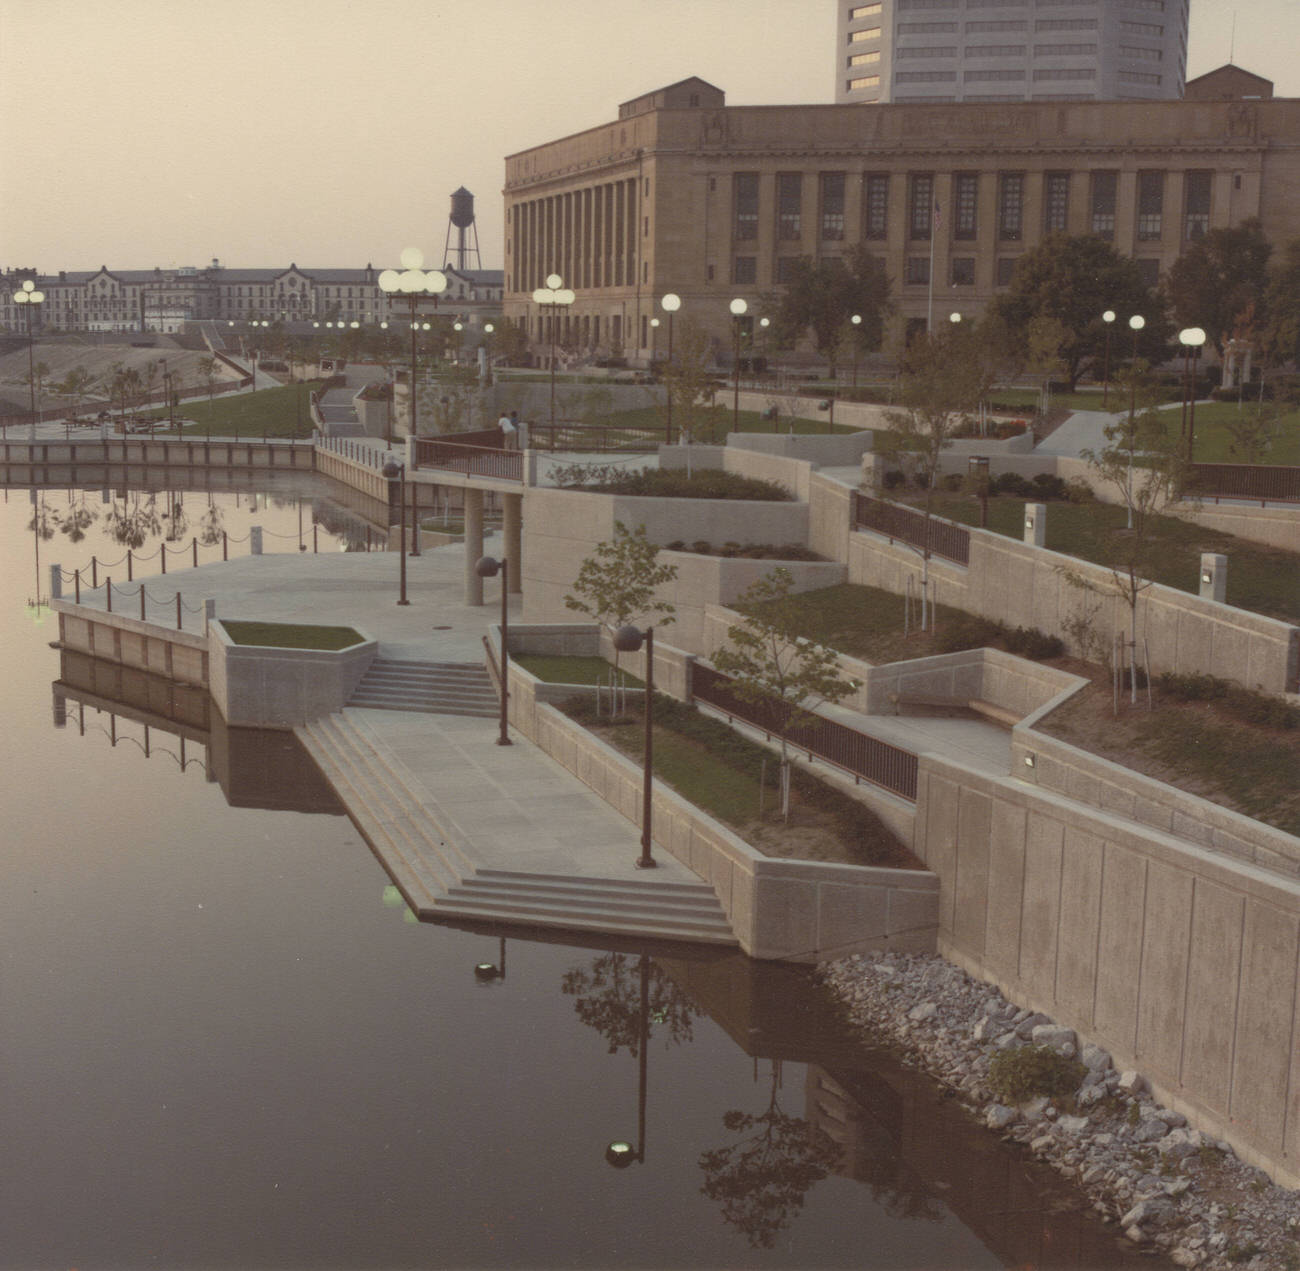 Battelle Riverfront Park before the installation of the Santa Maria, dedicated April 15, 1983.